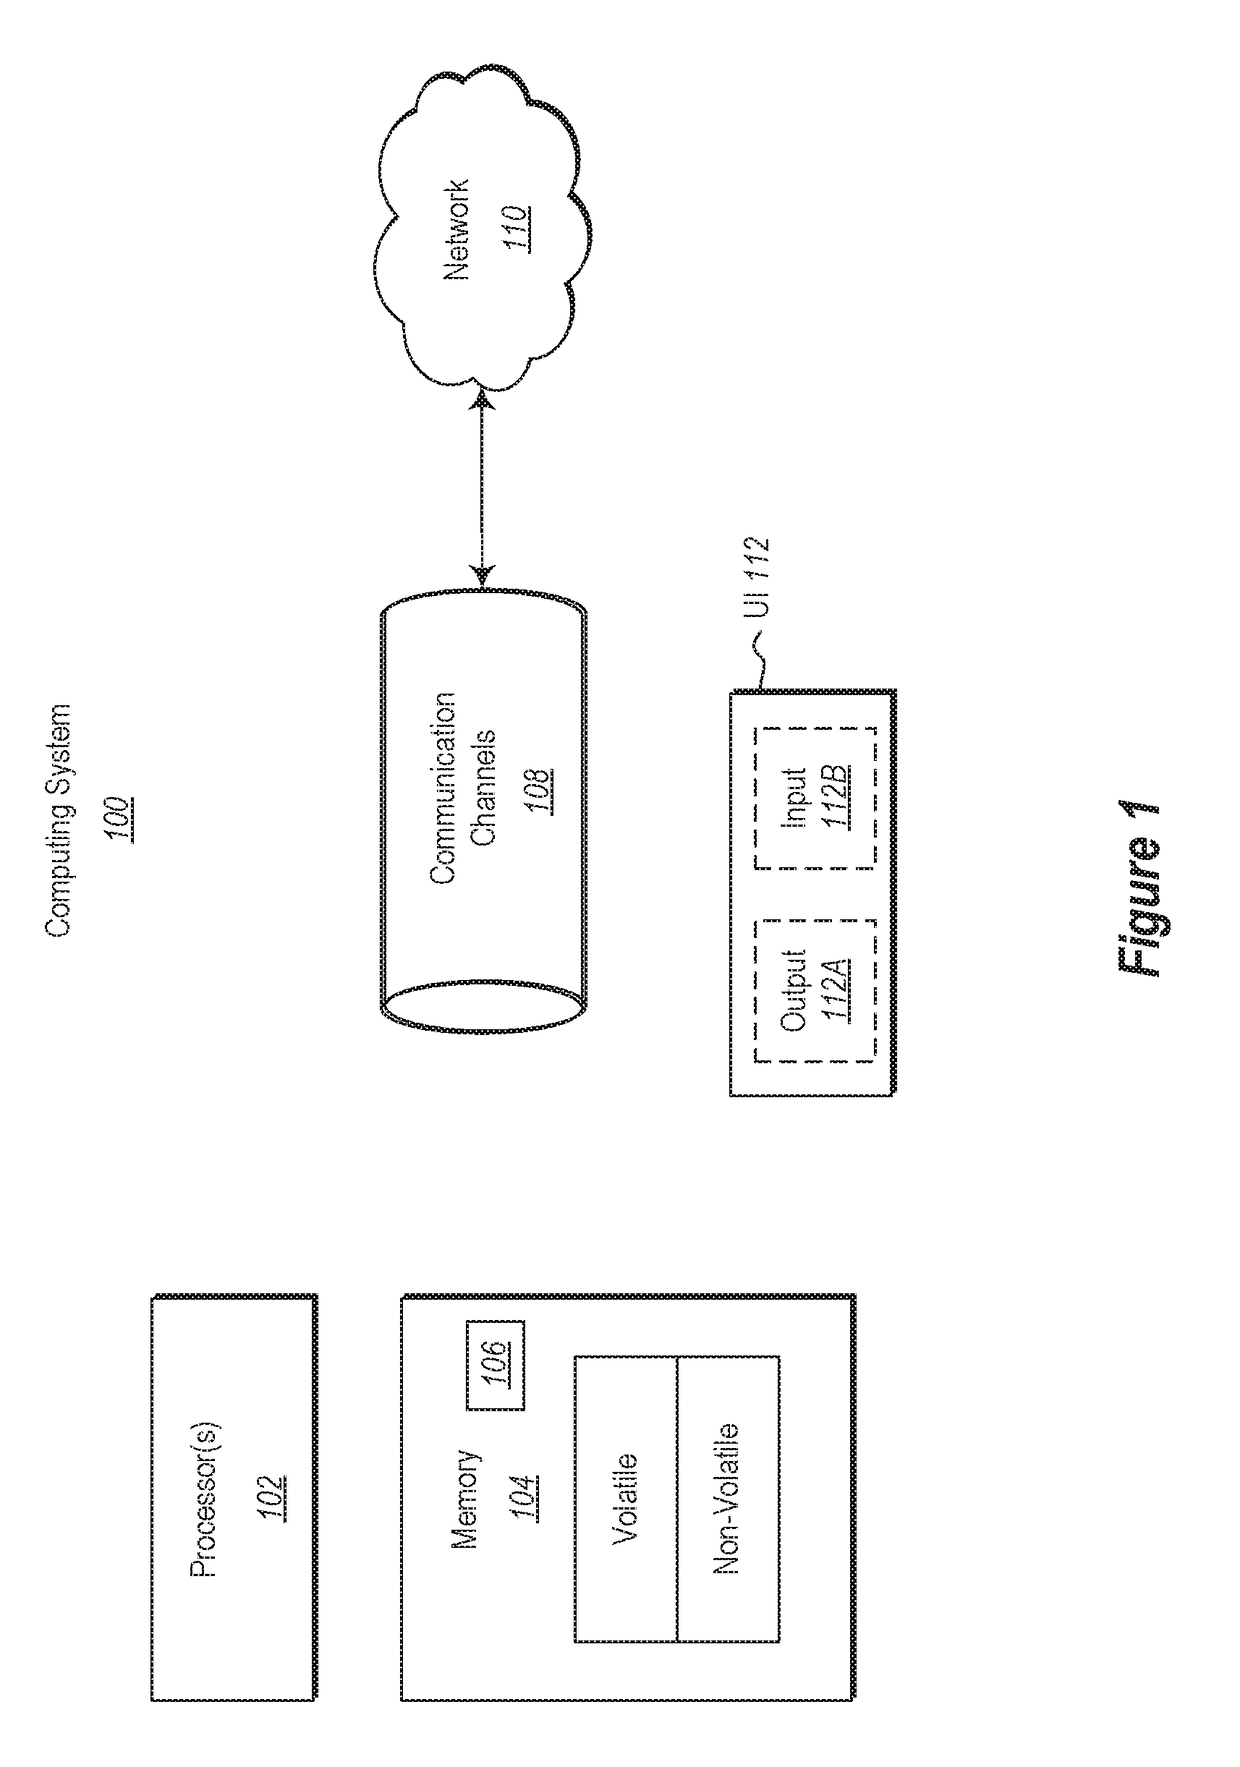 Systems and Methods for Engineering and Publishing Compliant Content